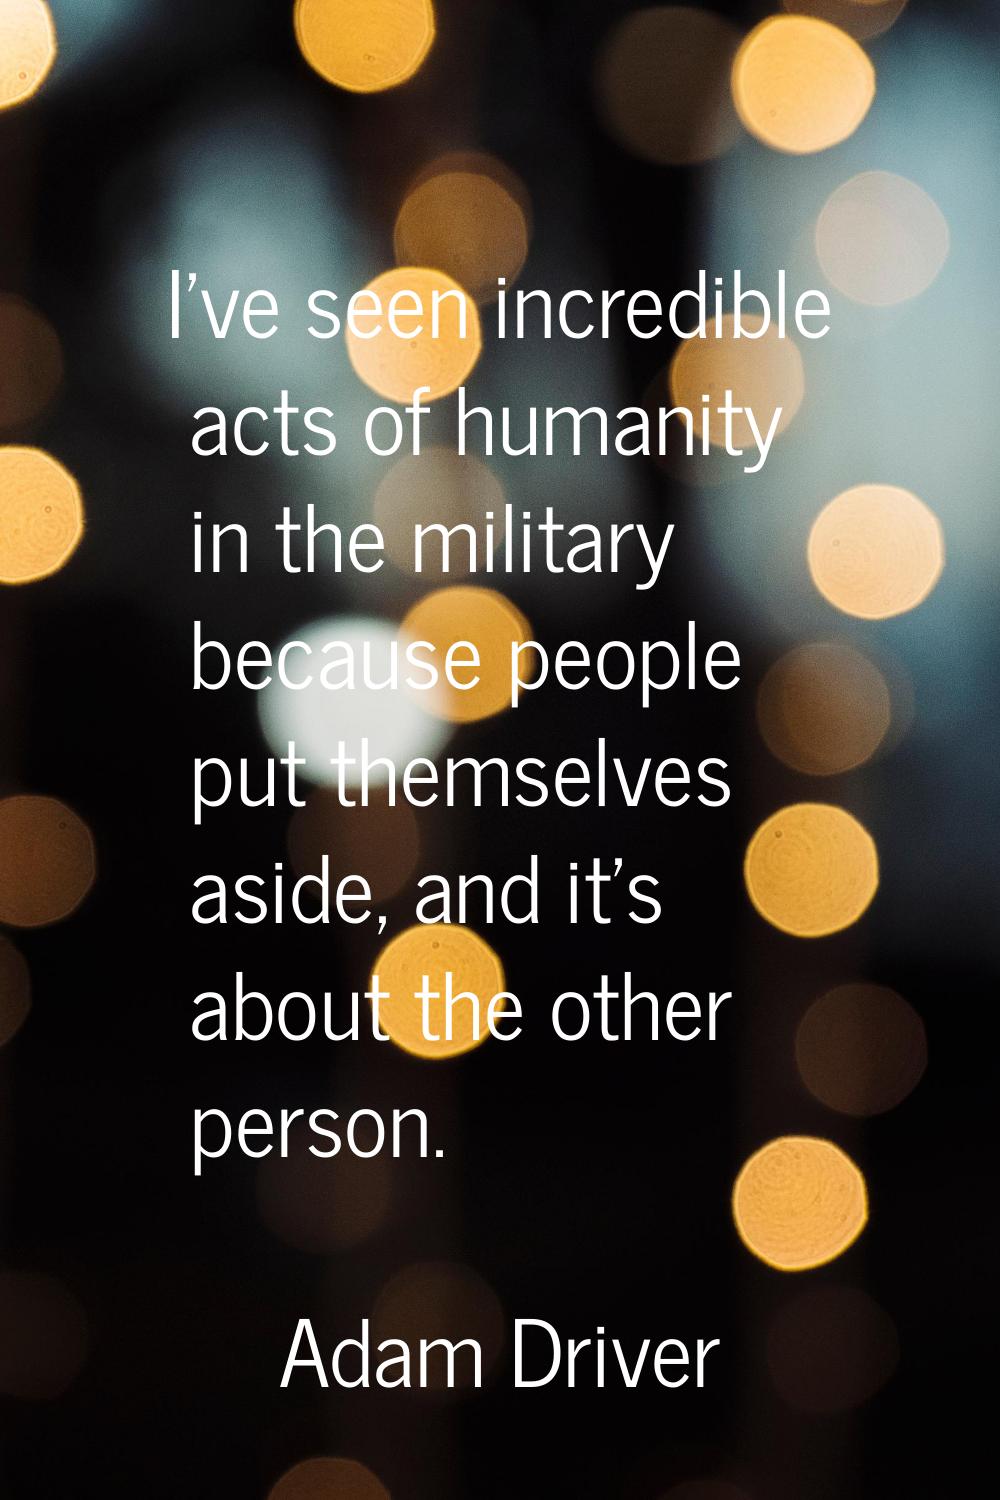 I've seen incredible acts of humanity in the military because people put themselves aside, and it's